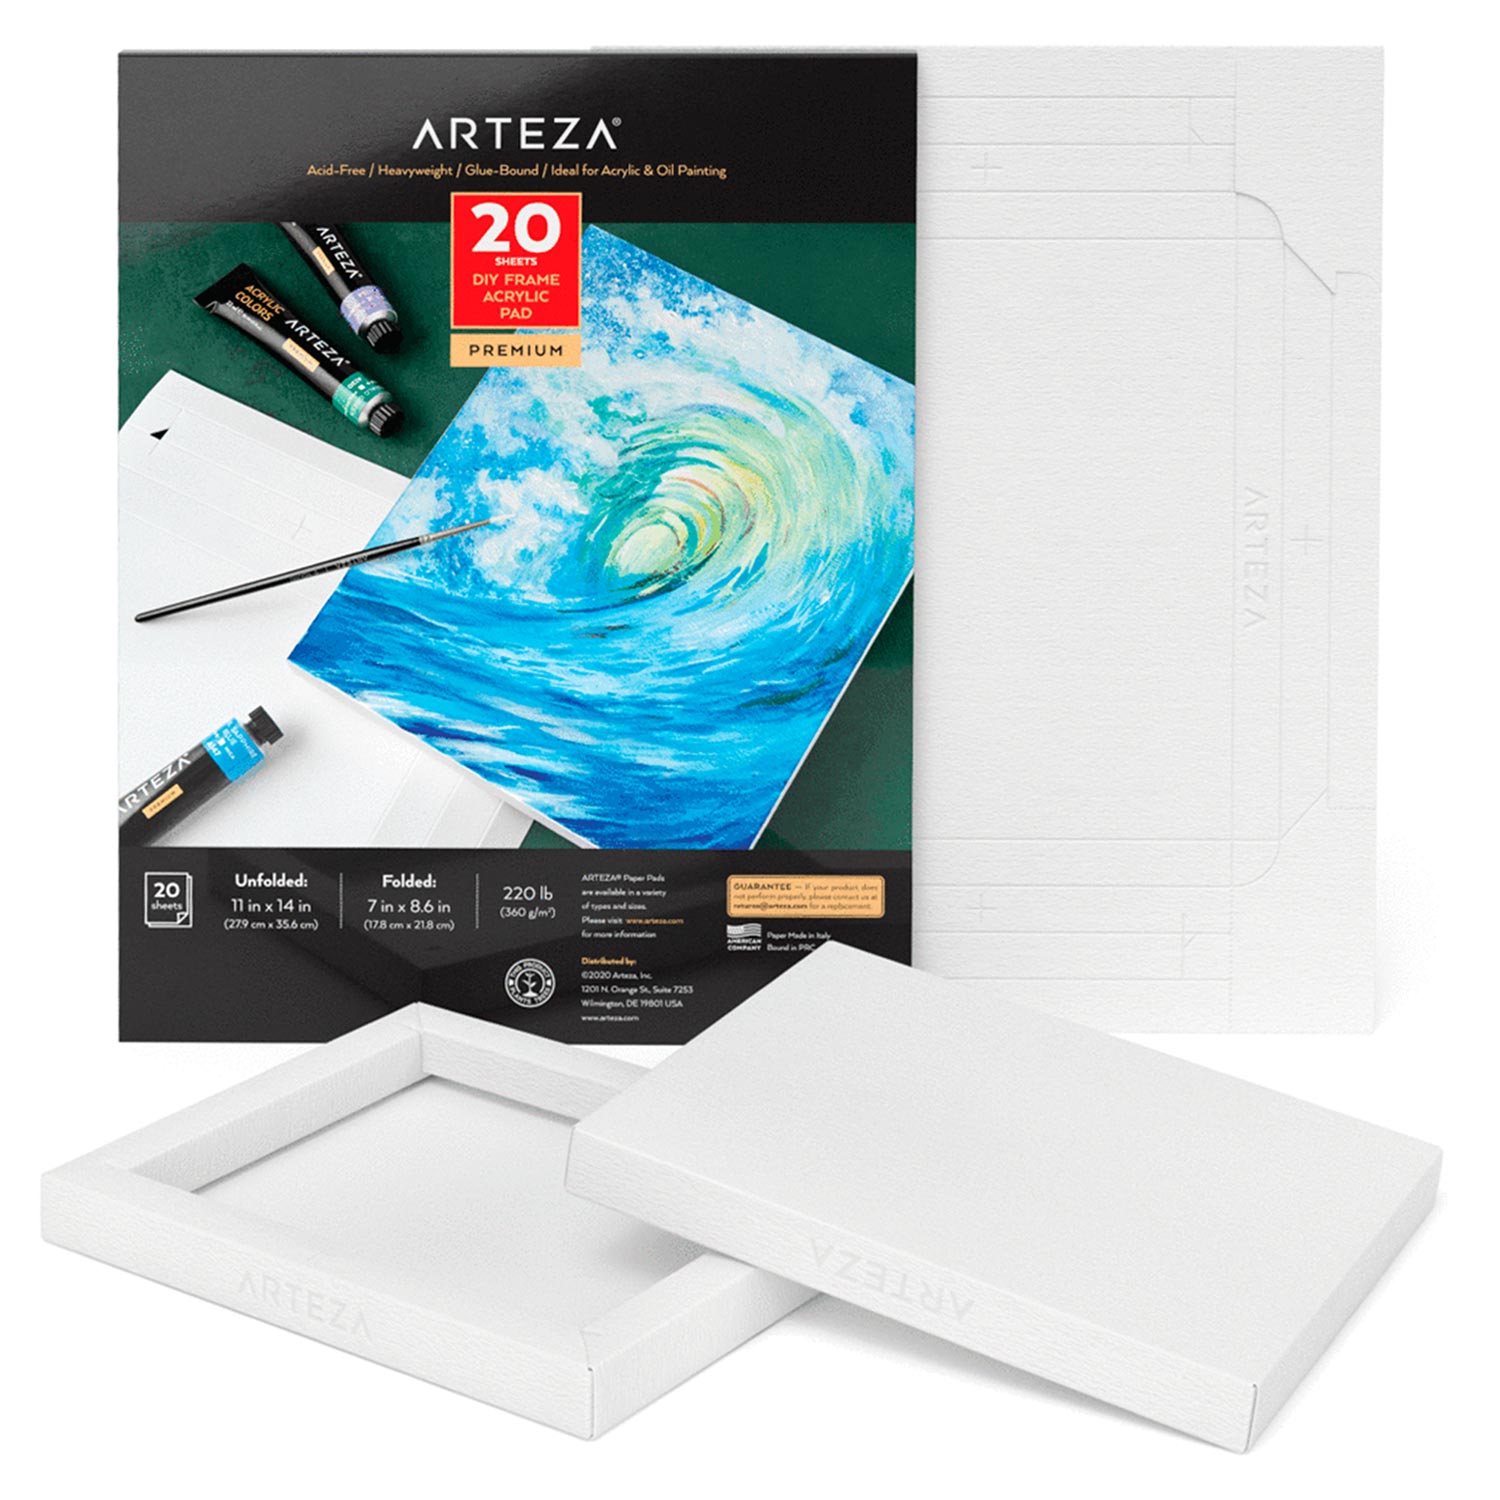 Arteza Acrylic Painting Art Set, 12 Colors Acrylic Paint, 15 Detail Brushes and 7x8.6 Inches Foldable Canvas Paper Pad Bundle, Art Supplies for